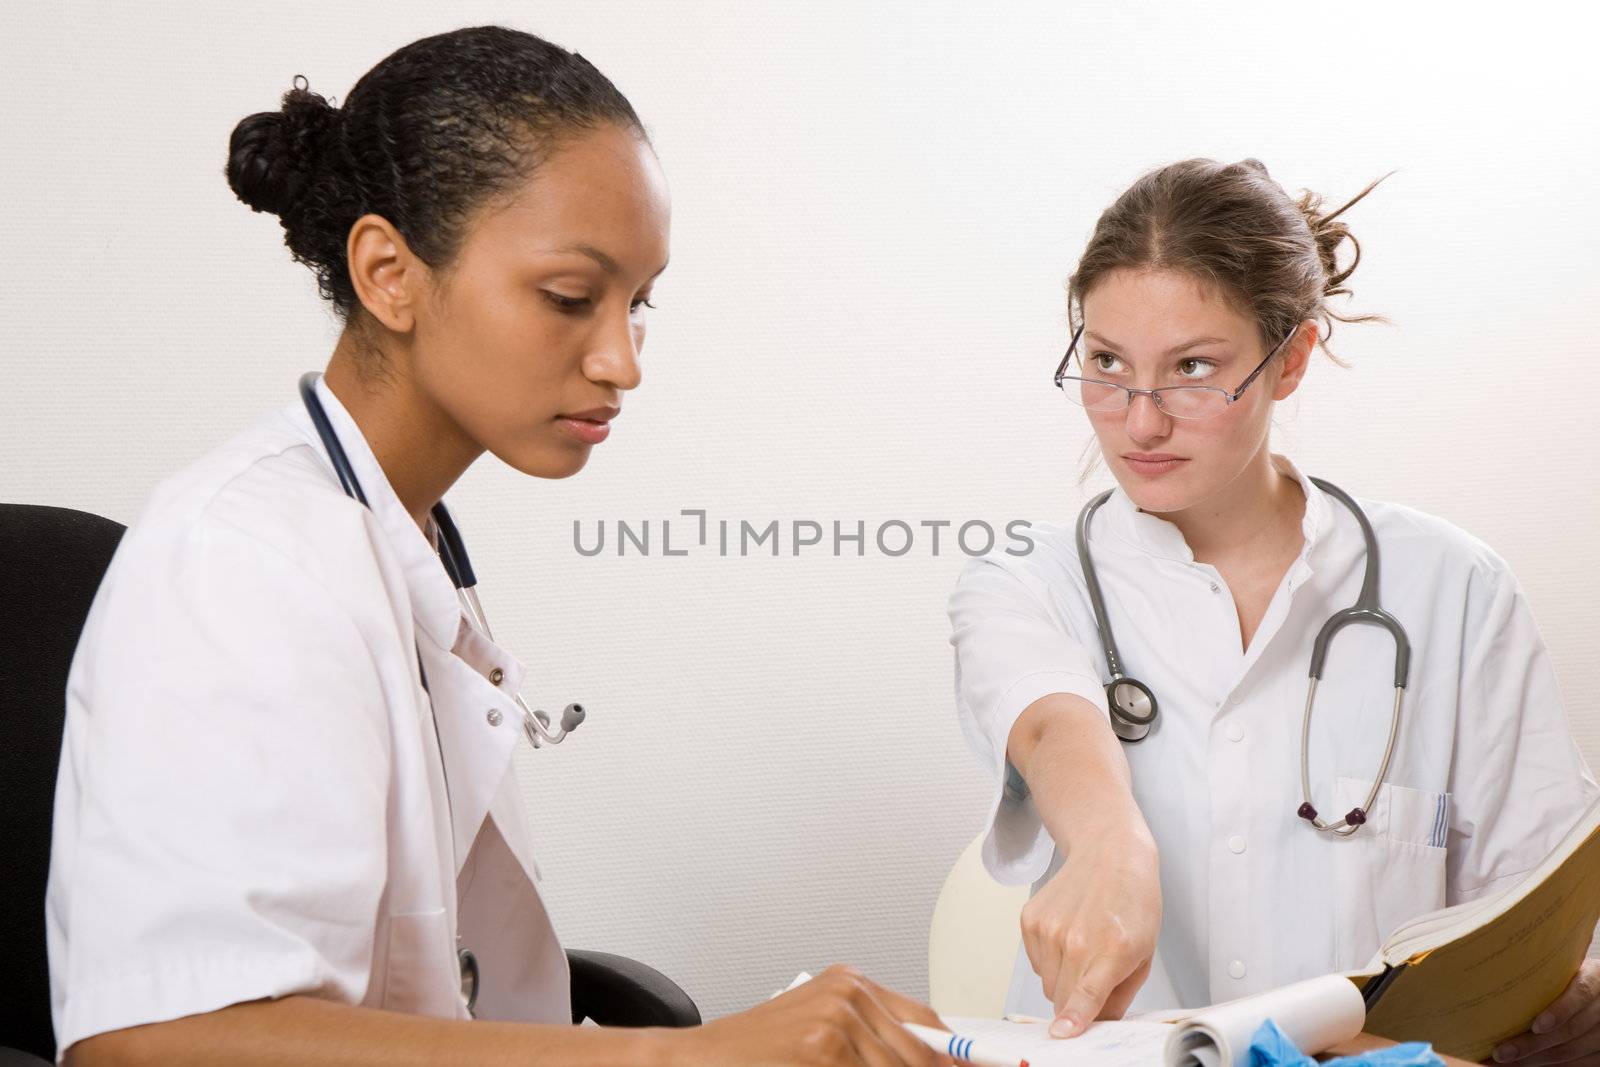 Two medical students working together for their exams